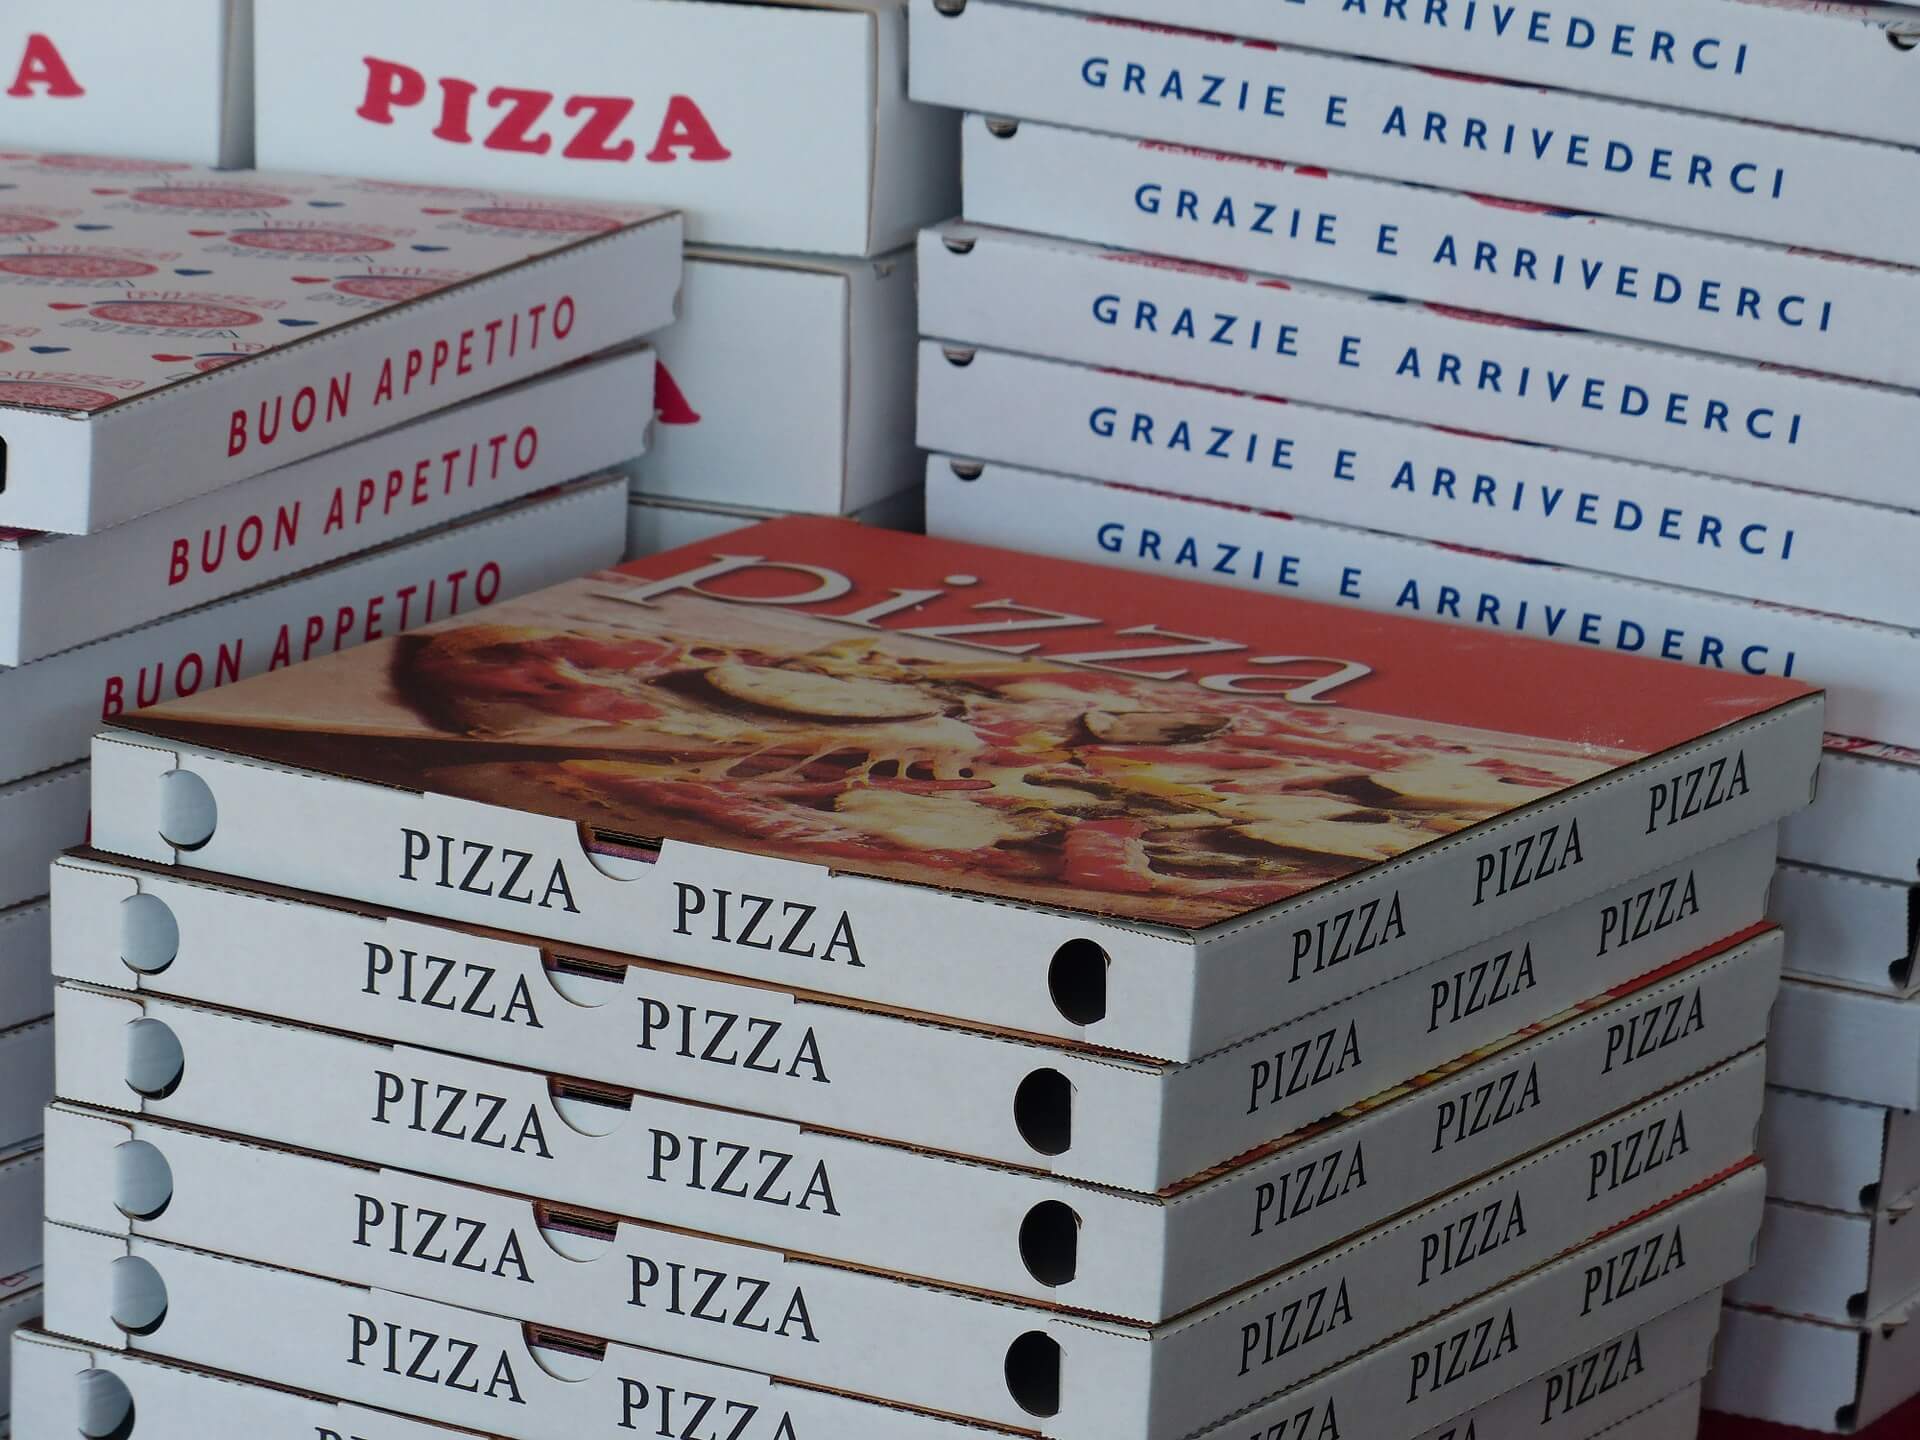 Stacks of pizza boxes